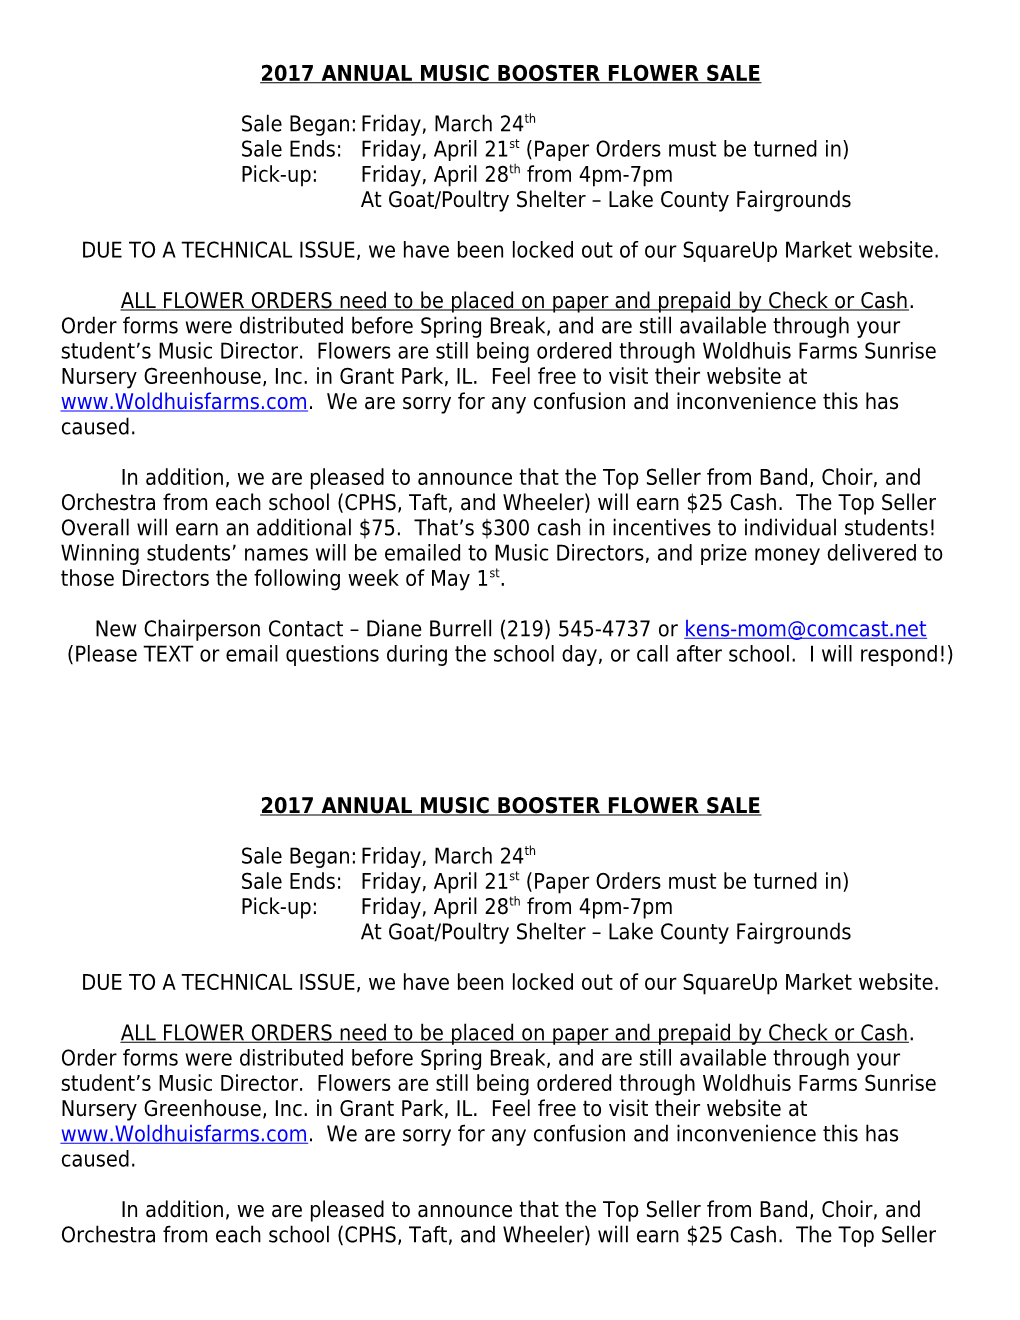 2014 Annual Music Booster Flower Sale